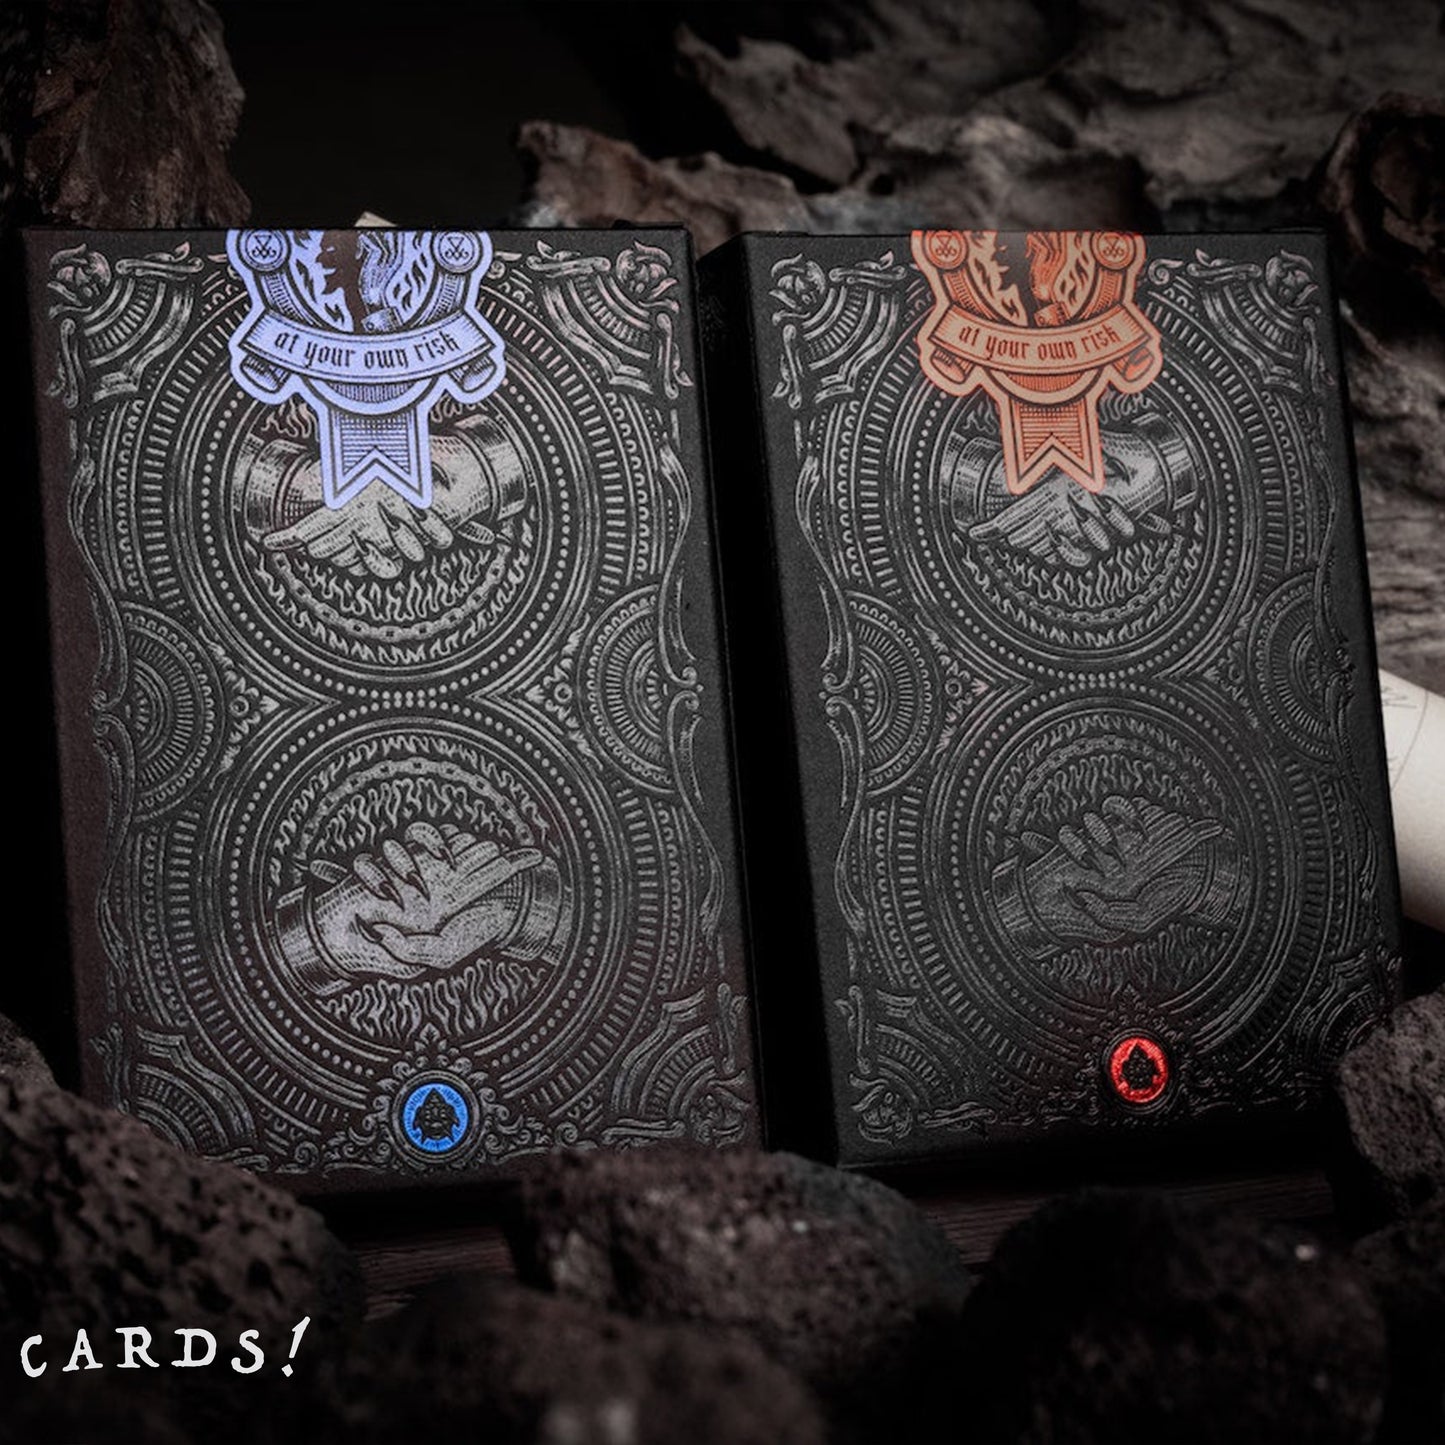 DEAL with the Devil - Cobalt Blue Playing Cards